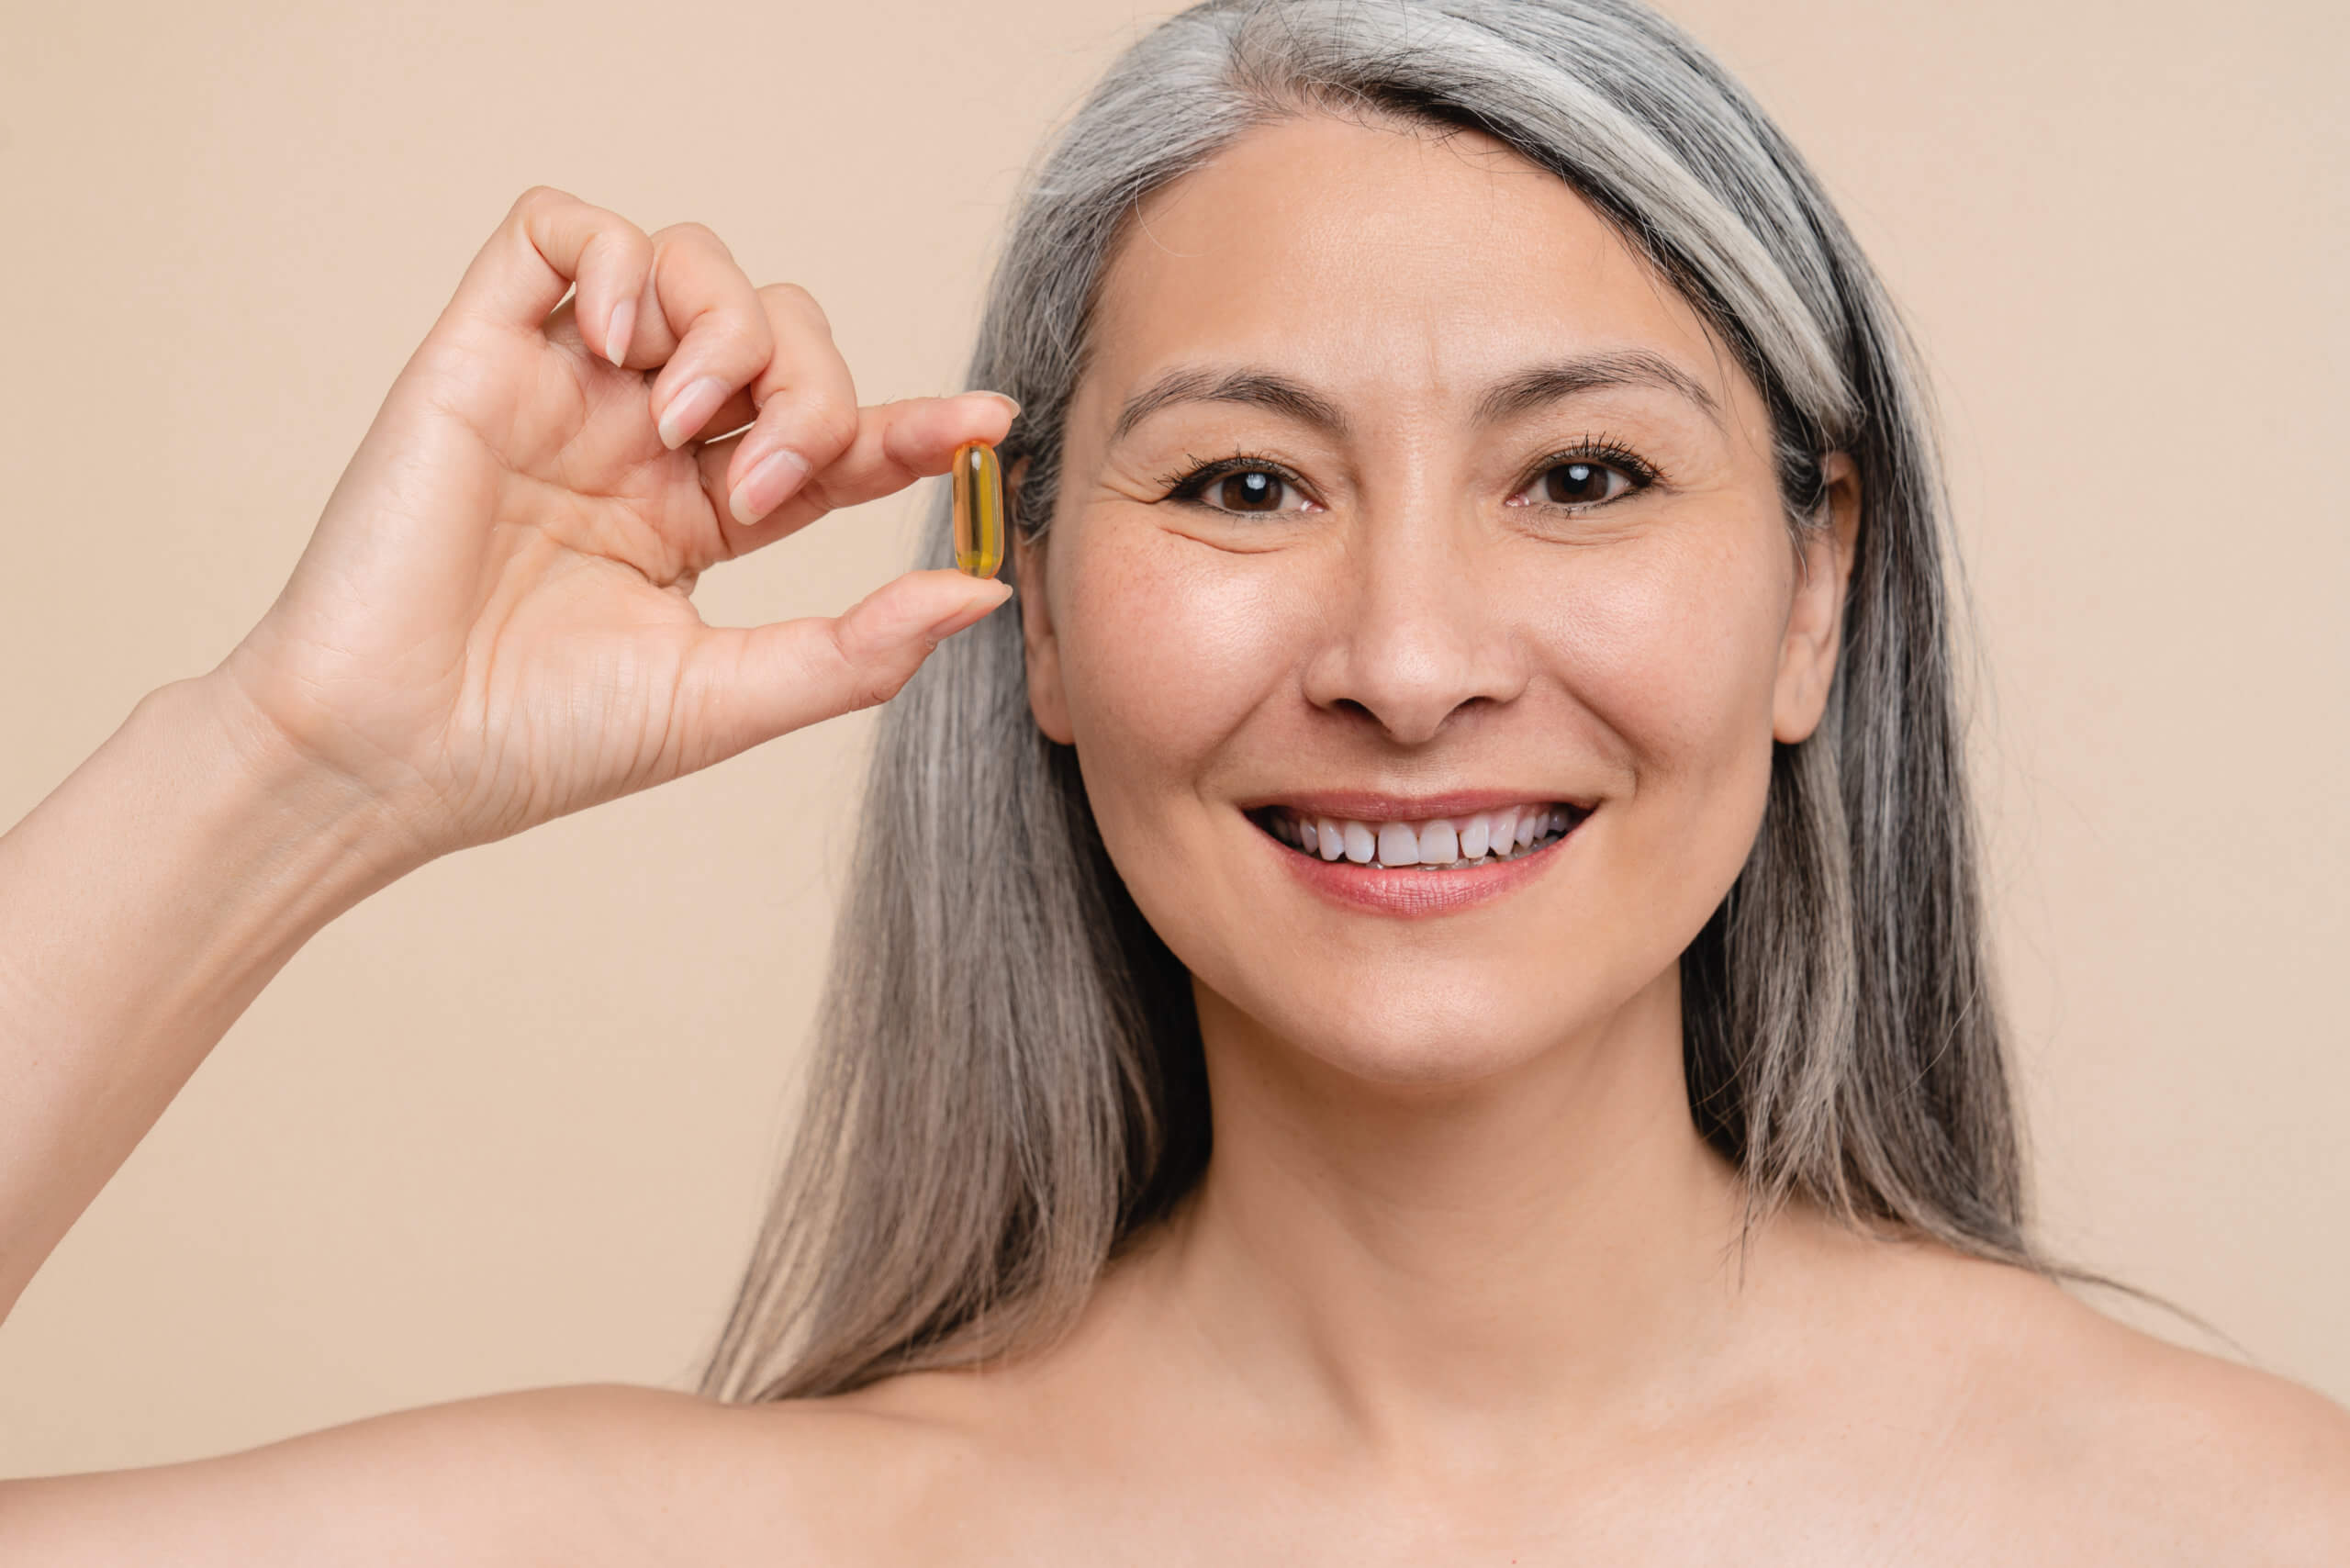 OMEGA 3: HEALTHY AGING